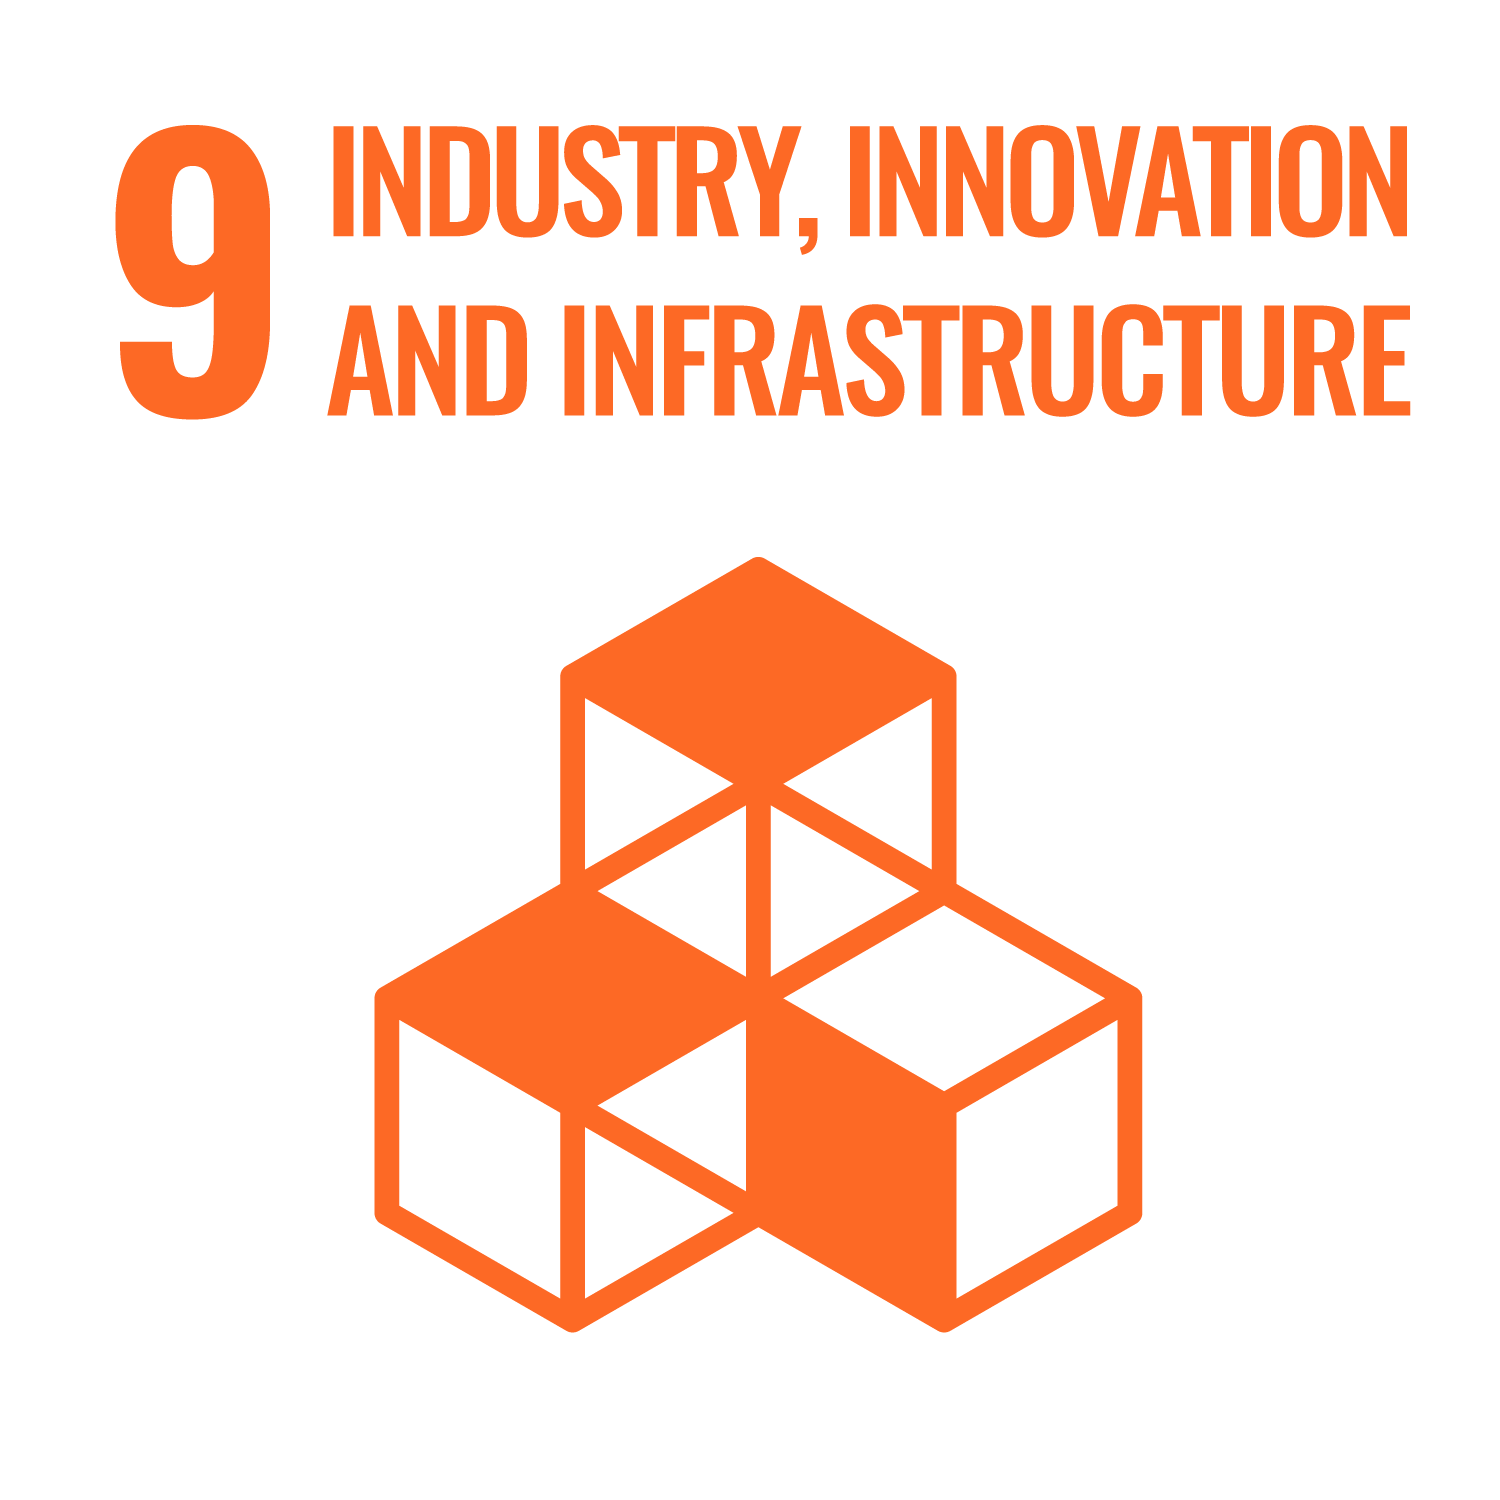 Industry innovation infrastructure